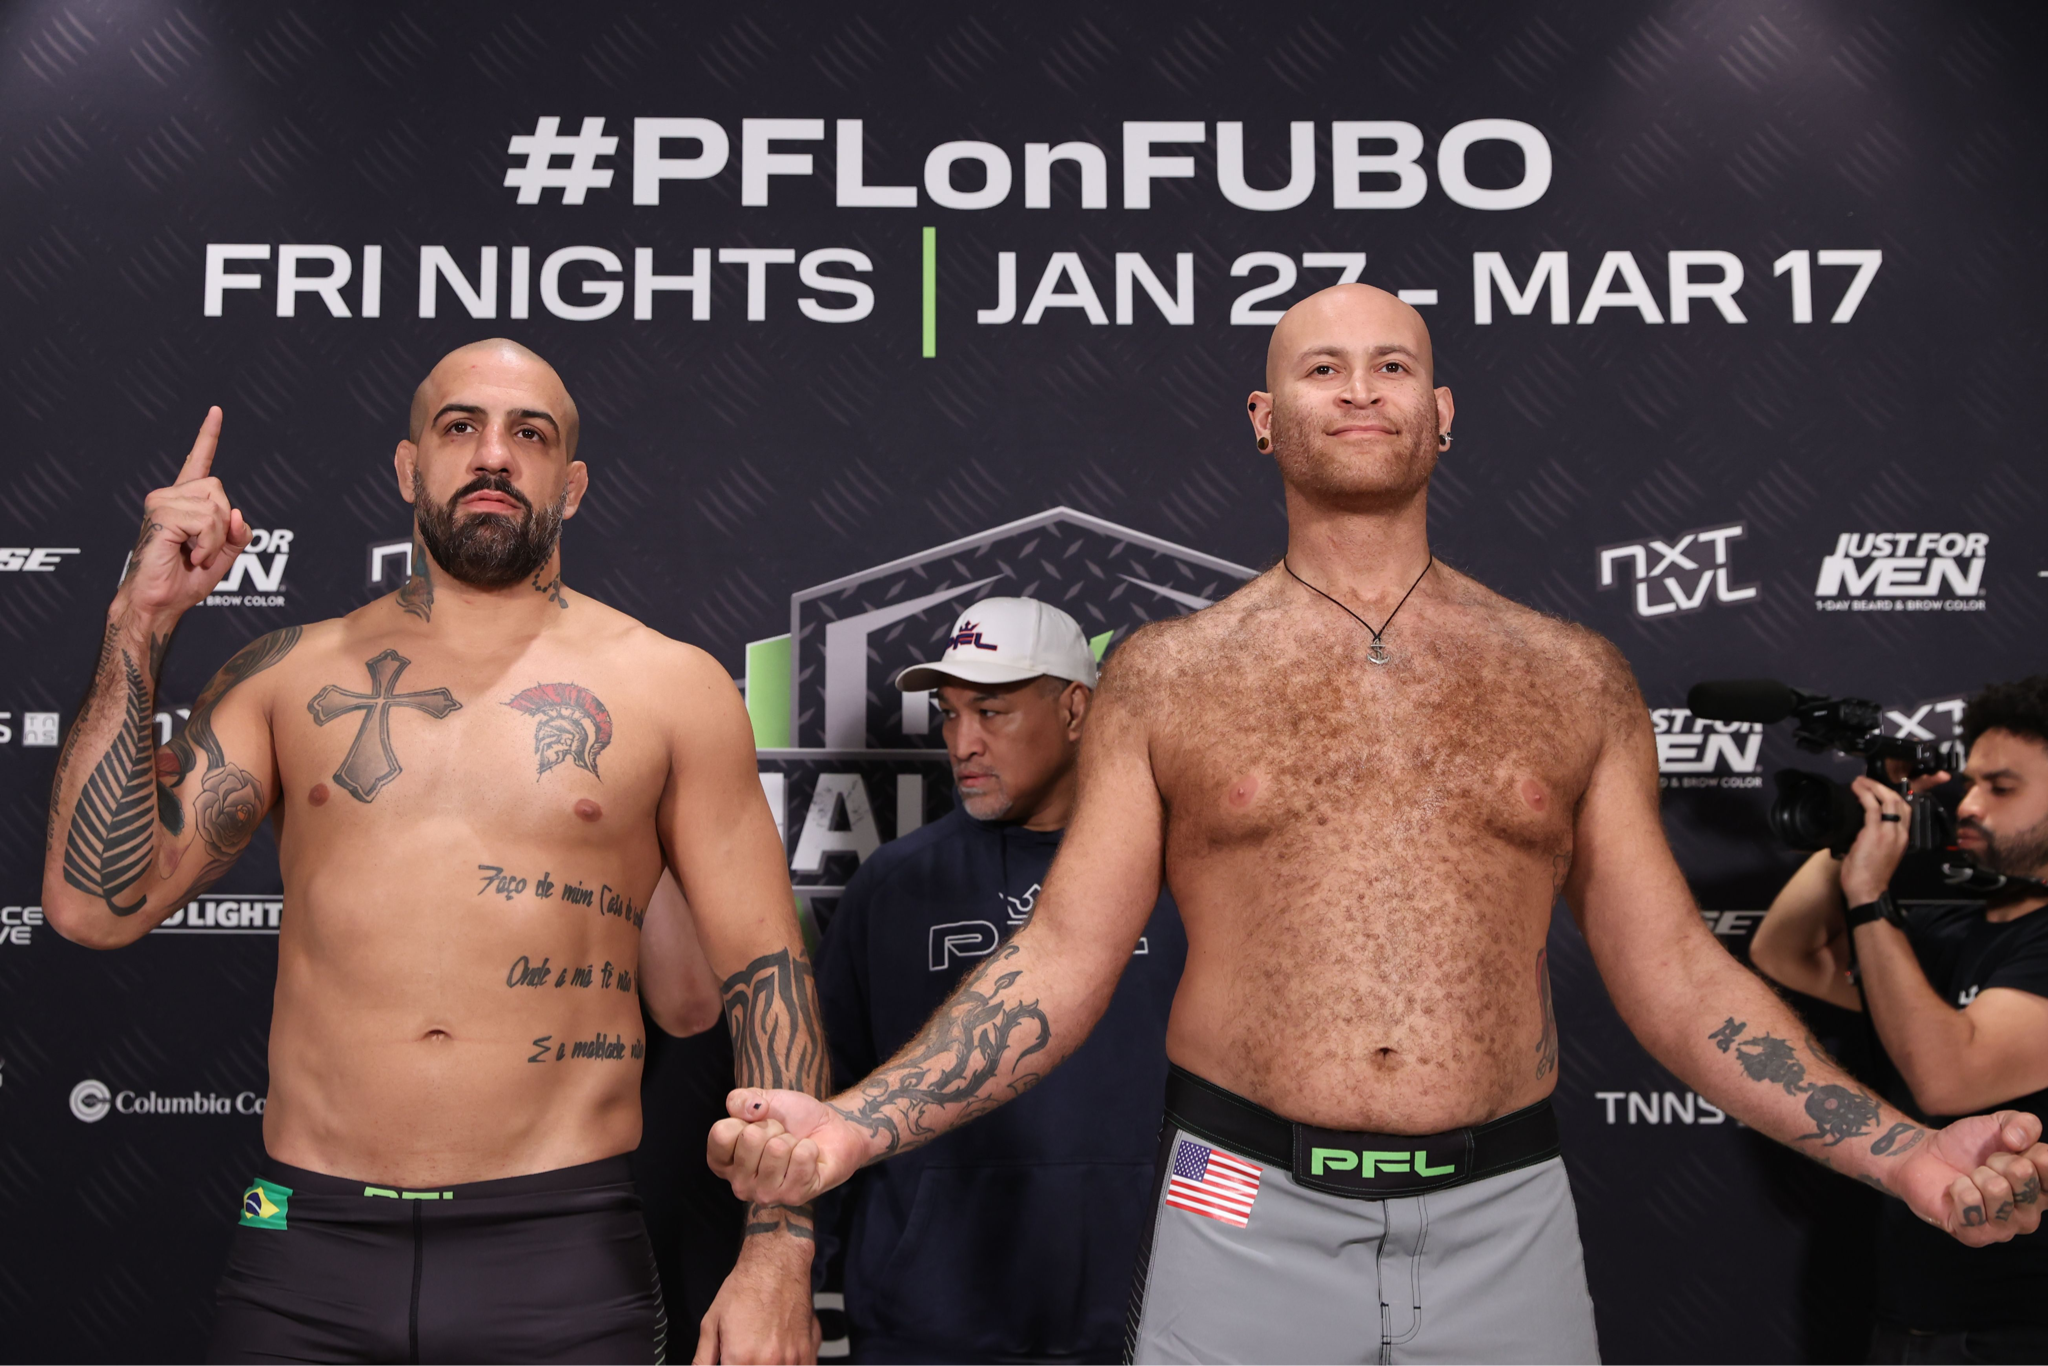 OFFICIAL WEIGH-IN RESULTS FOR 2023 PFL CHALLENGER SERIES WEEK 3